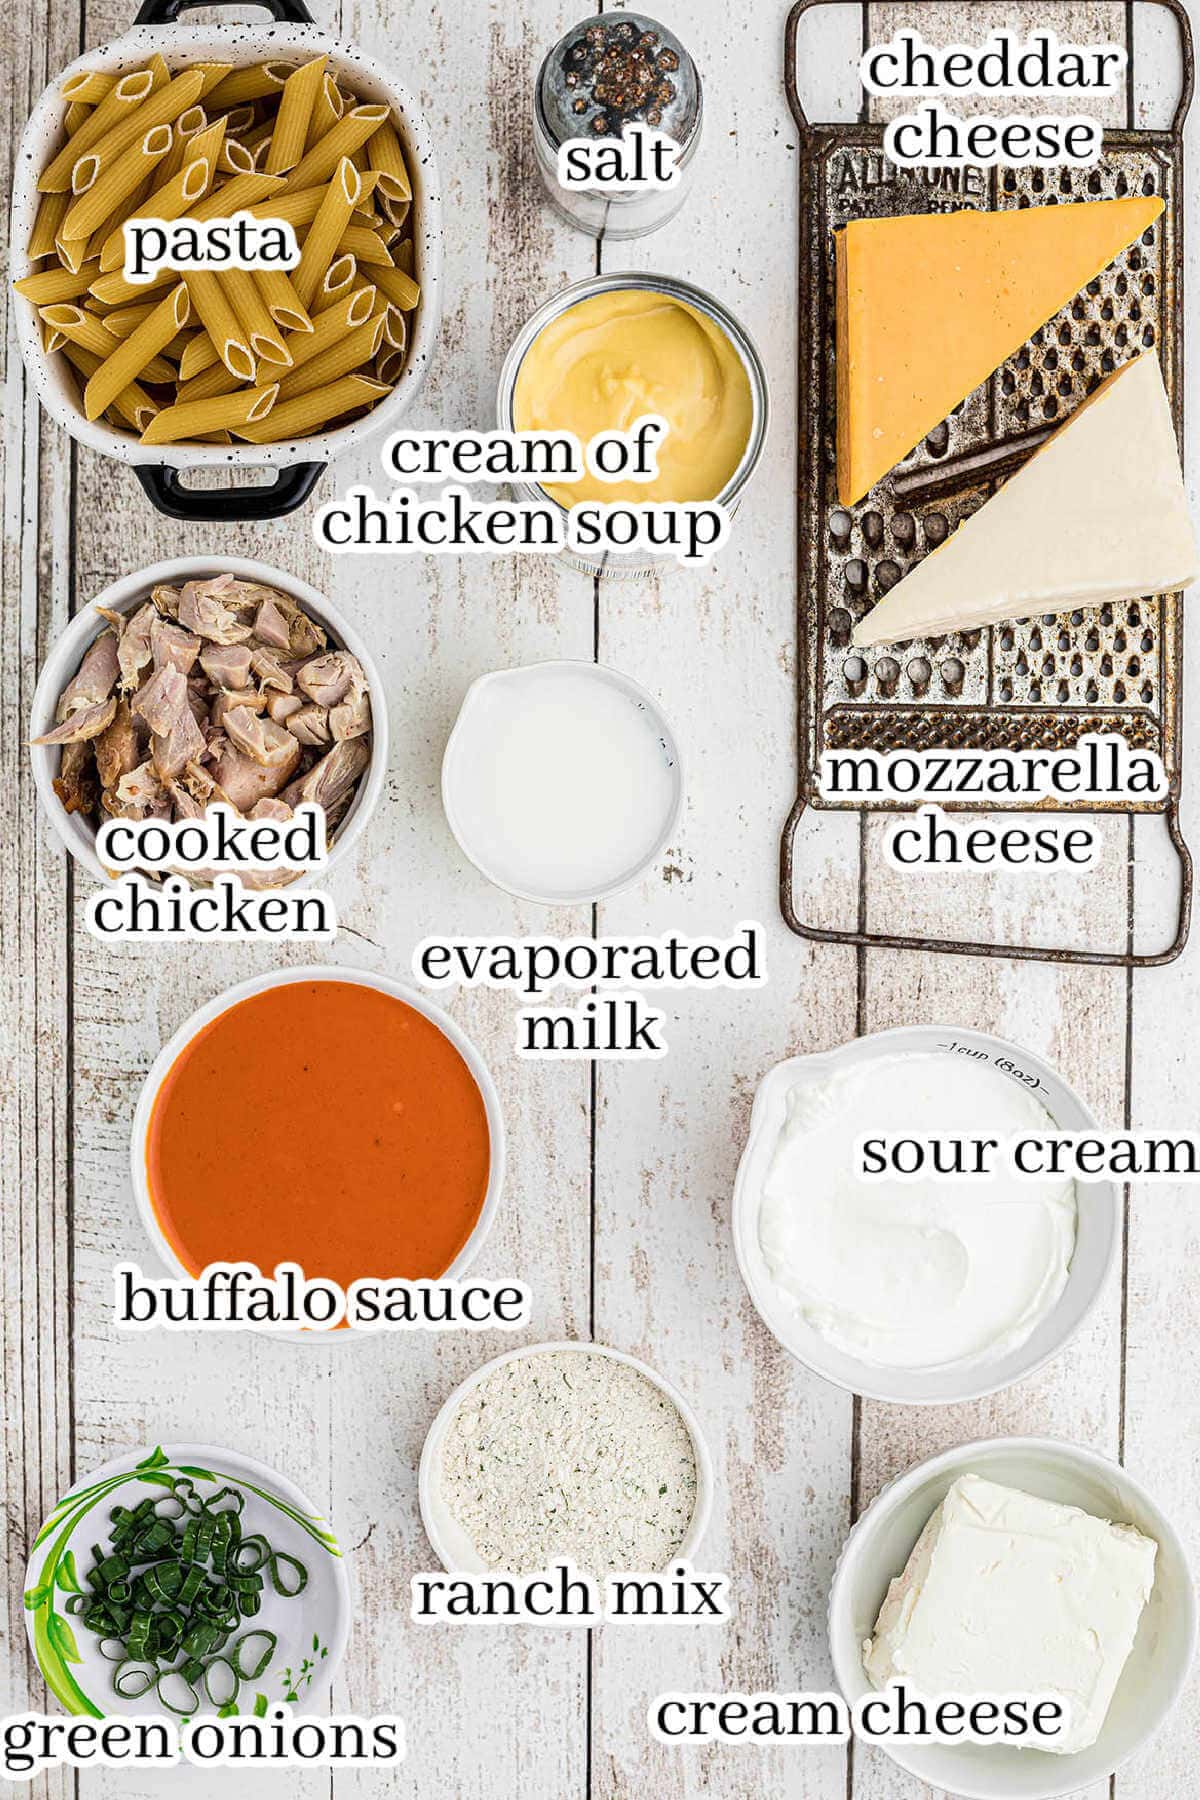 Ingredients for Buffalo Chicken Casserole Recipe, with print overlay.